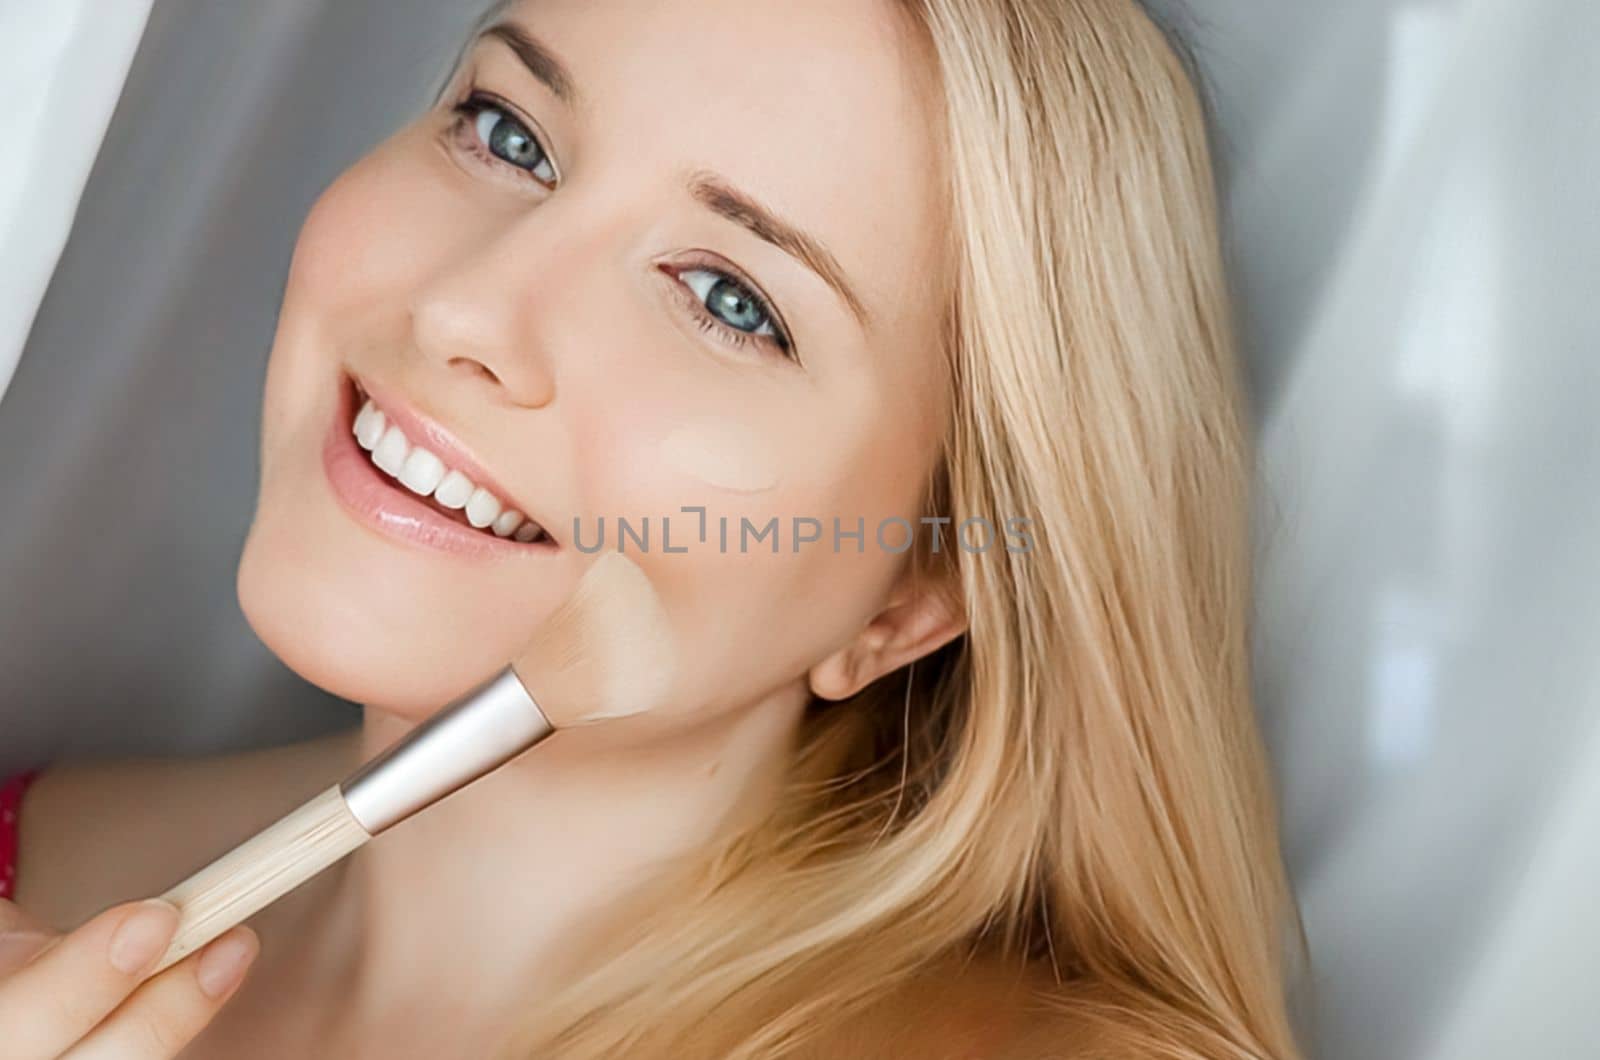 Beautiful blonde woman applying liquid make-up foundation on her skin with make-up brush.